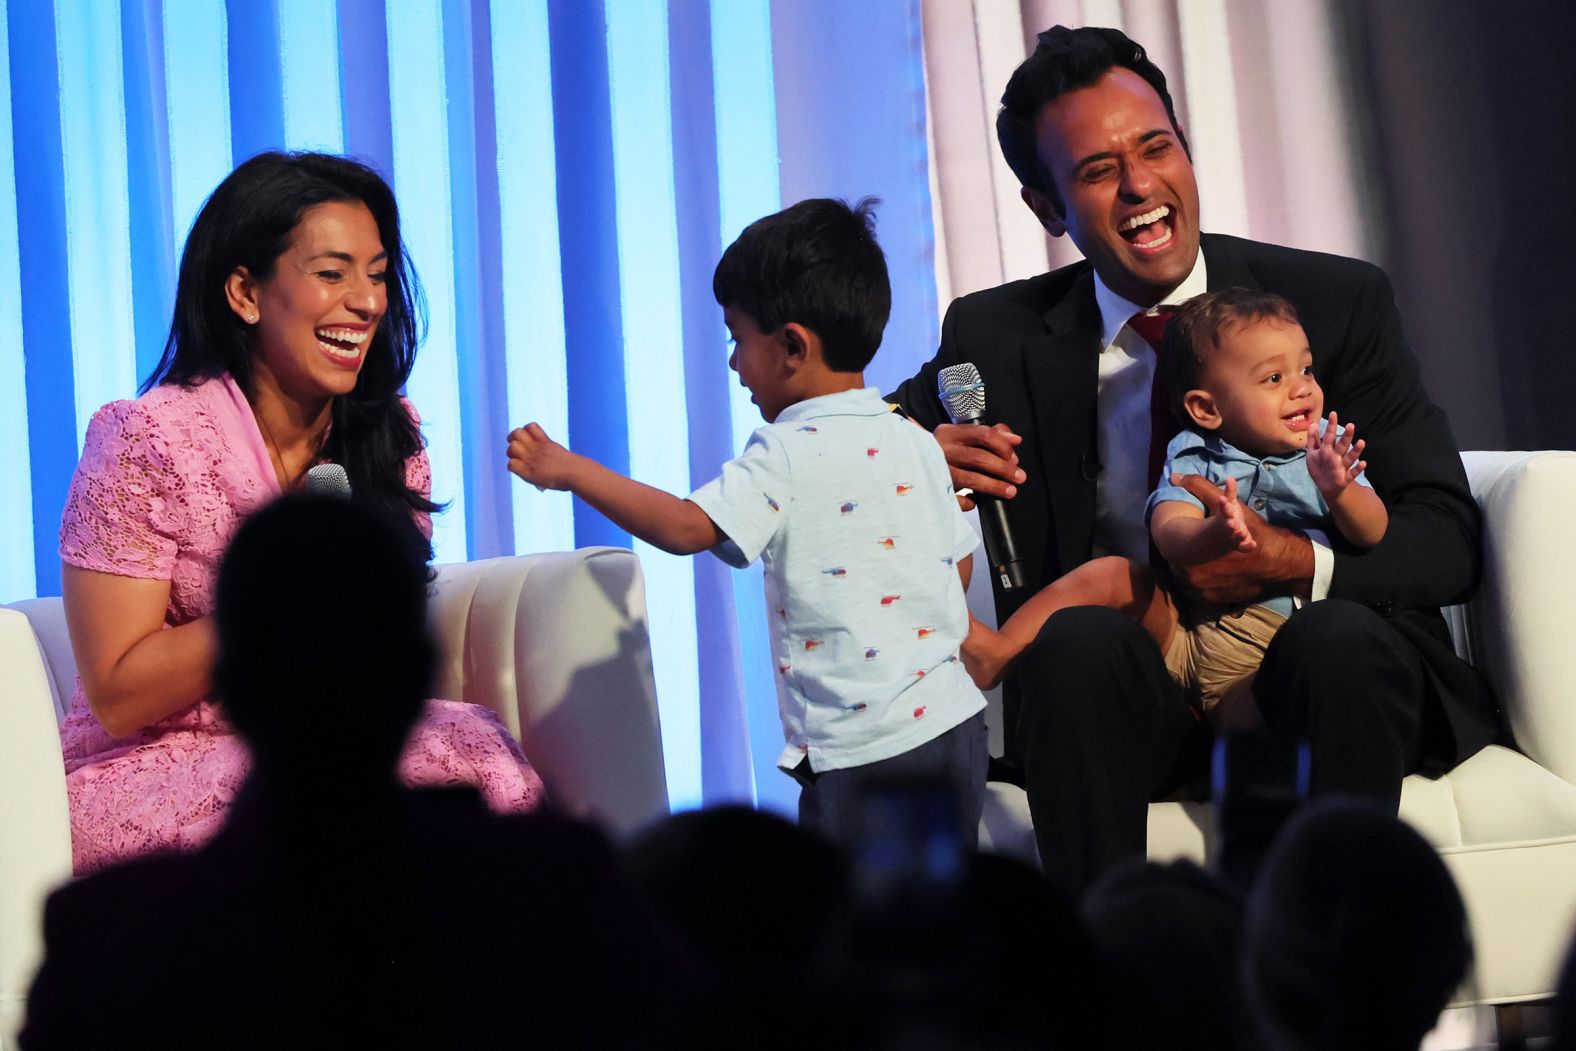 Ramaswamy is joined on stage by his wife, Apoorva, and their sons Karthik, left, and Arjun during the Moms for Liberty National Summit in Philadelphia in July 2023. Apoorva Ramaswamy is a throat cancer surgeon at Ohio State University.